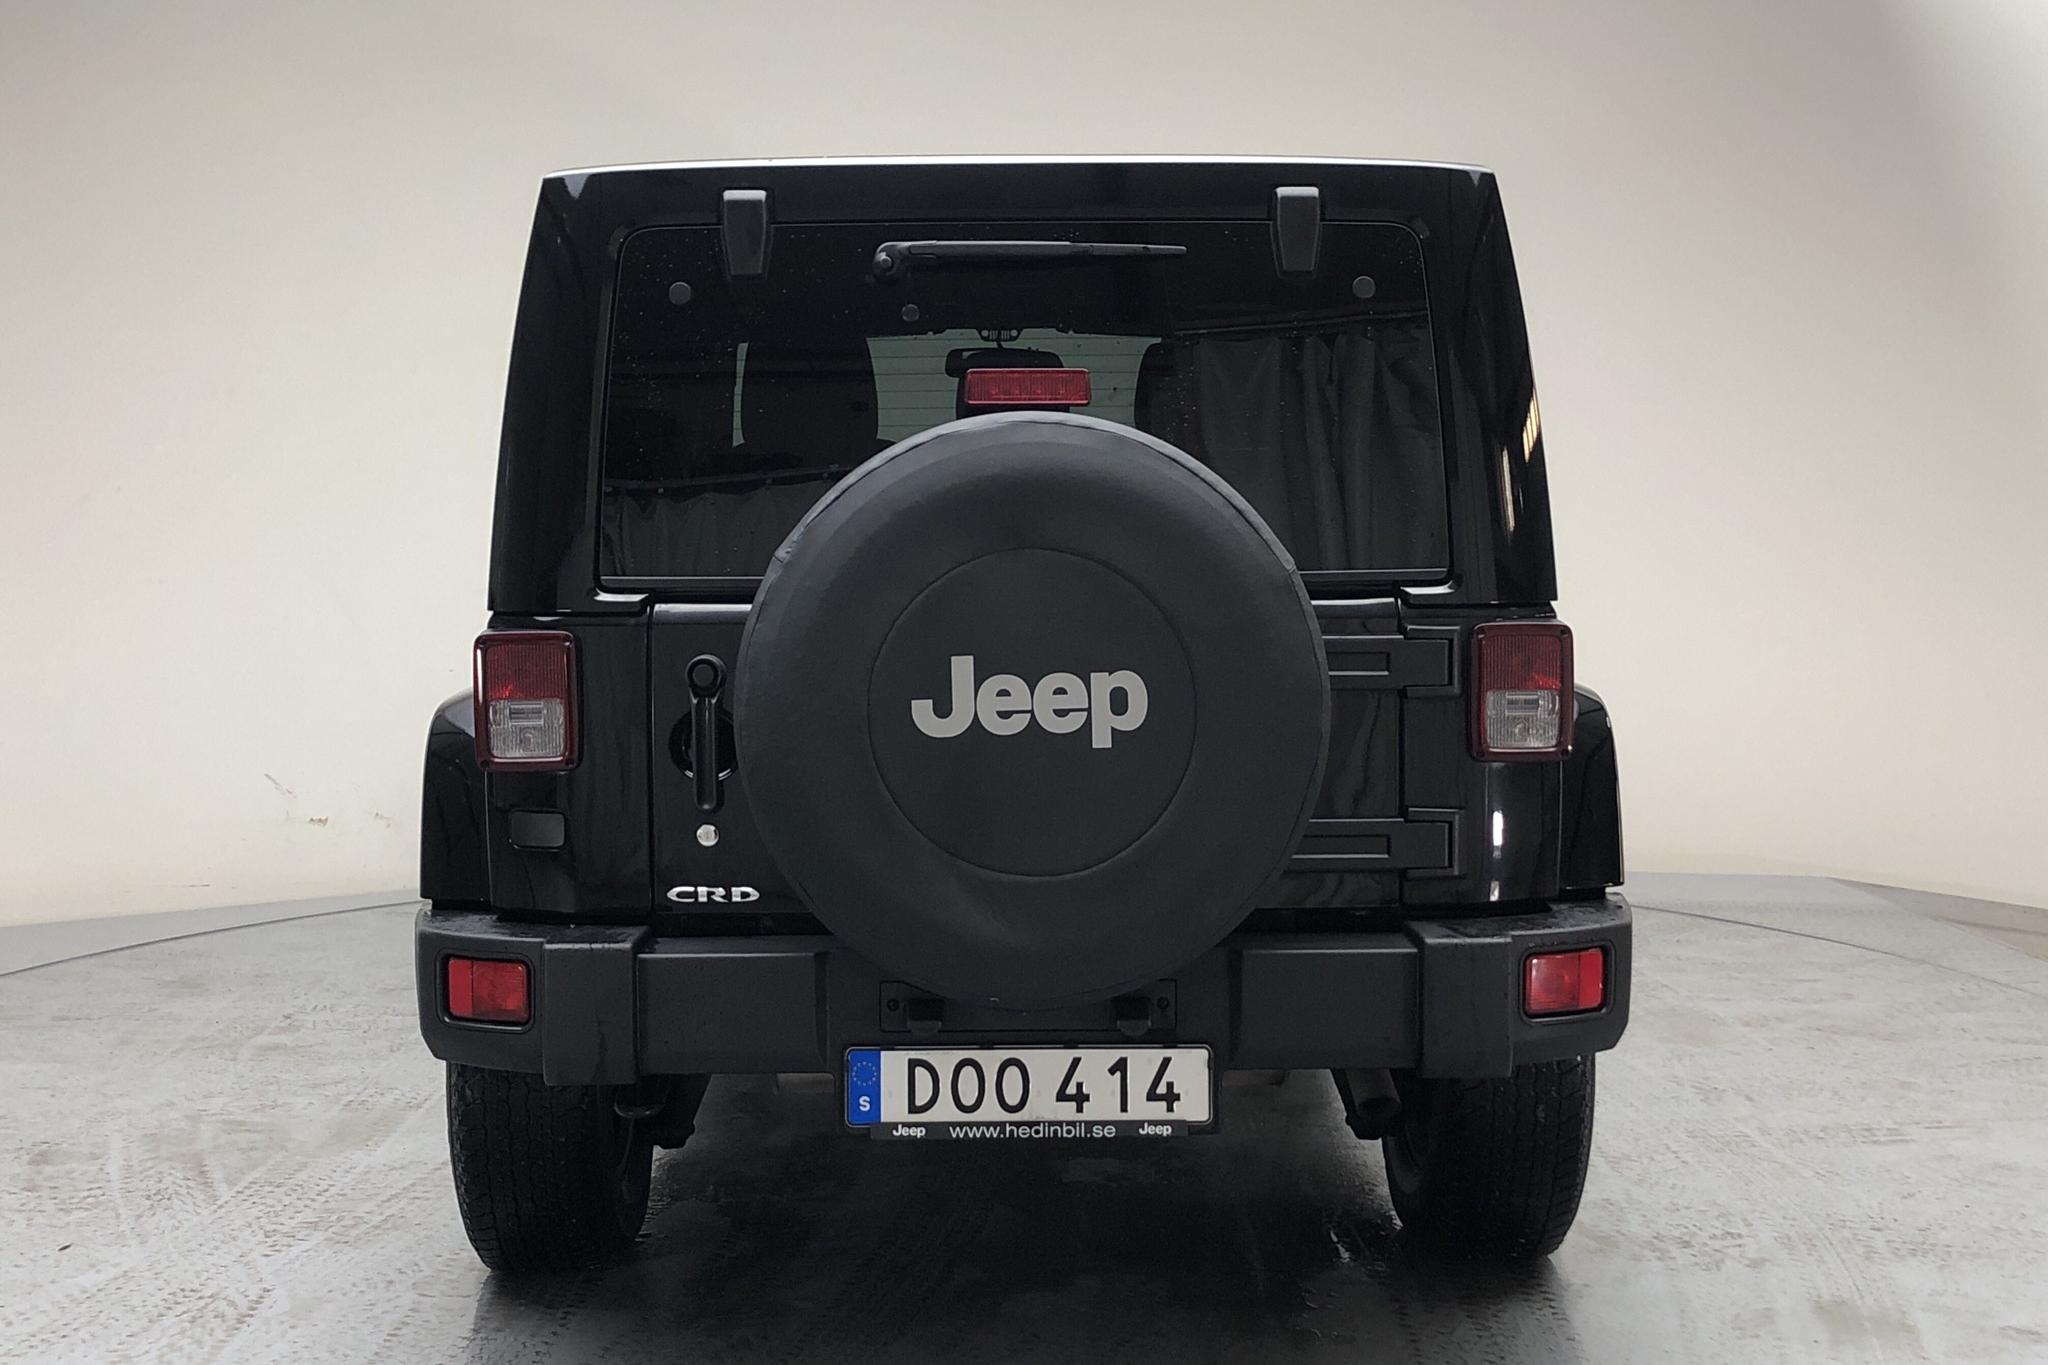 Jeep Wrangler Unlimited 2.8 CRD 4dr (200hk) - 58 830 km - Automatic - black - 2015